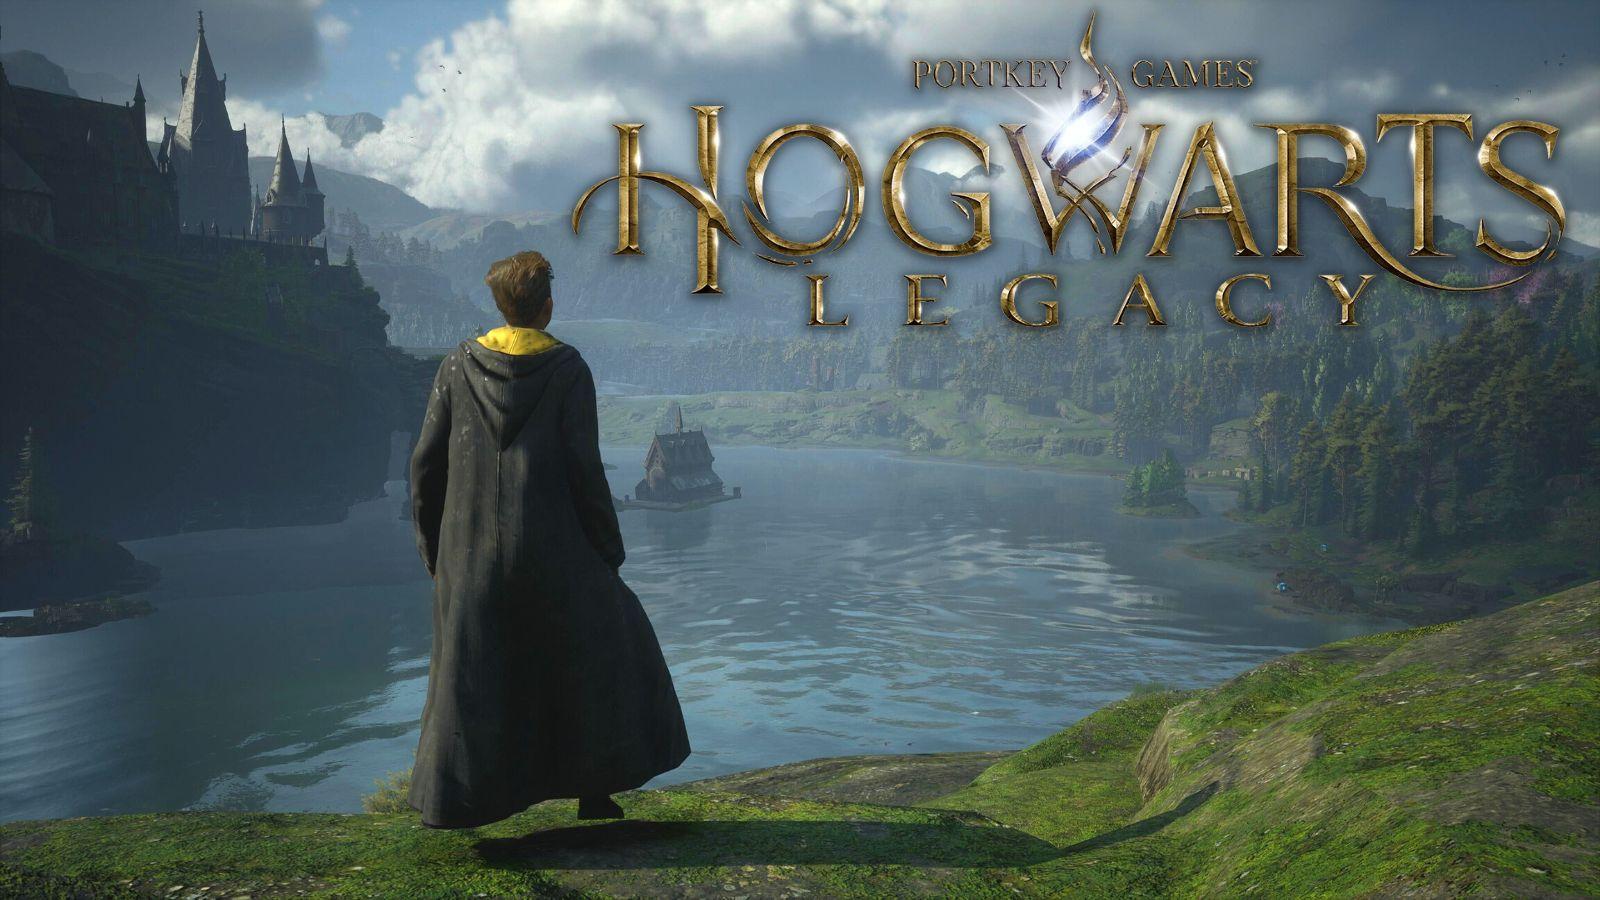 Hogwarts Legacy Overview